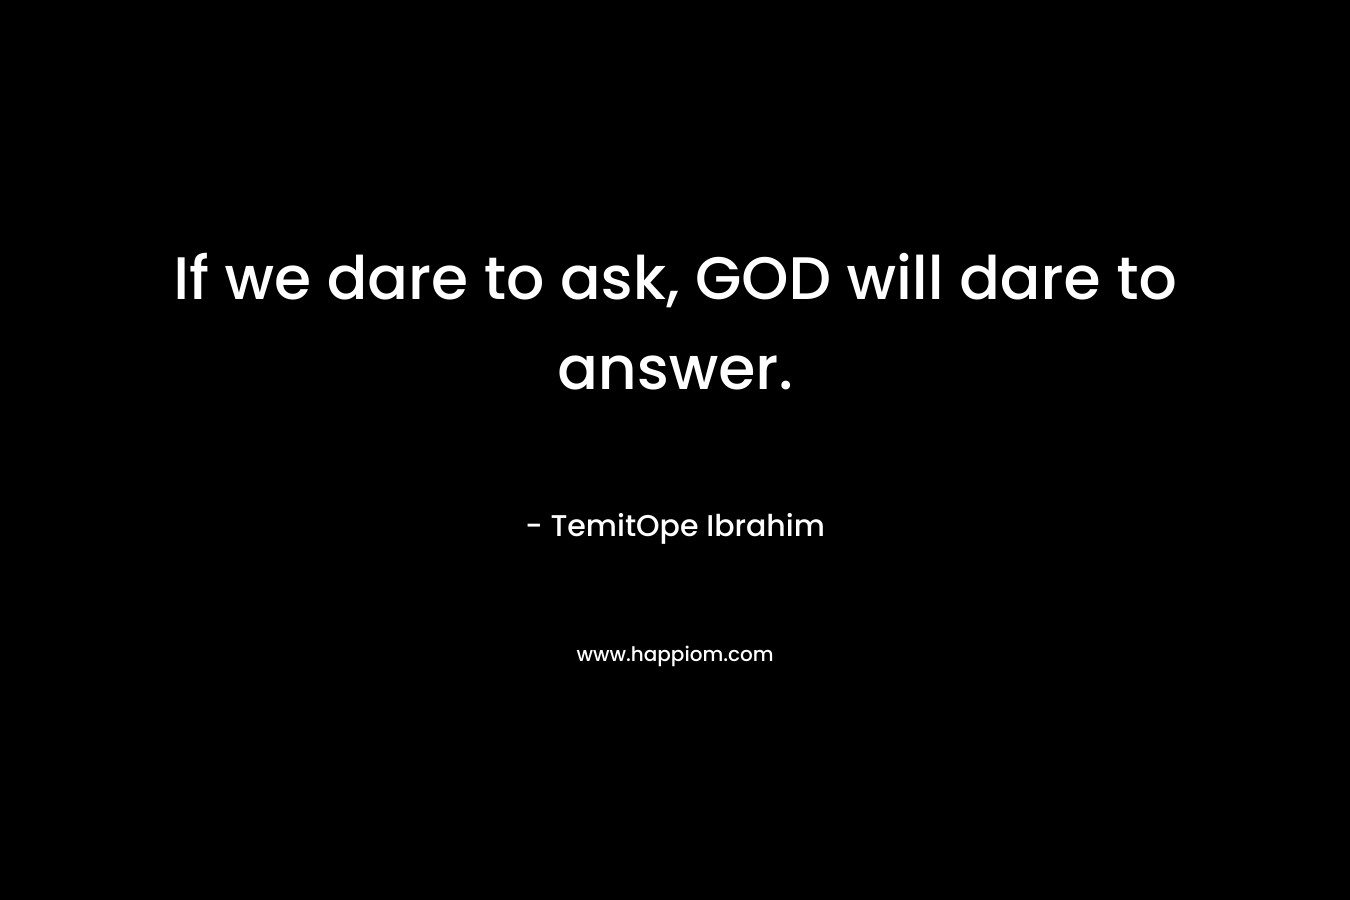 If we dare to ask, GOD will dare to answer.